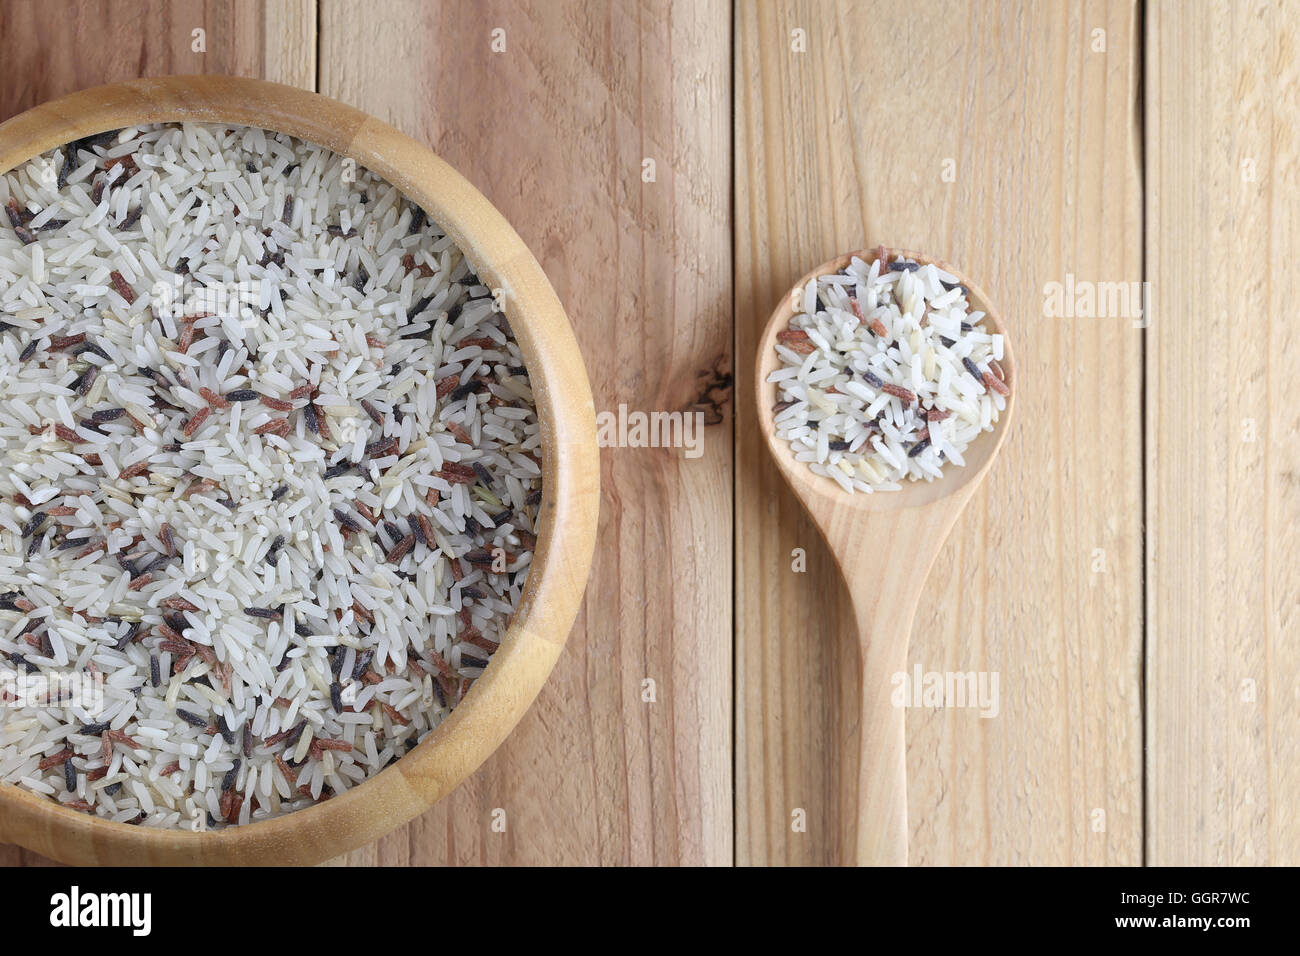 Organic rice in wooden spoon and bowl on wood background concept for nature food. Stock Photo